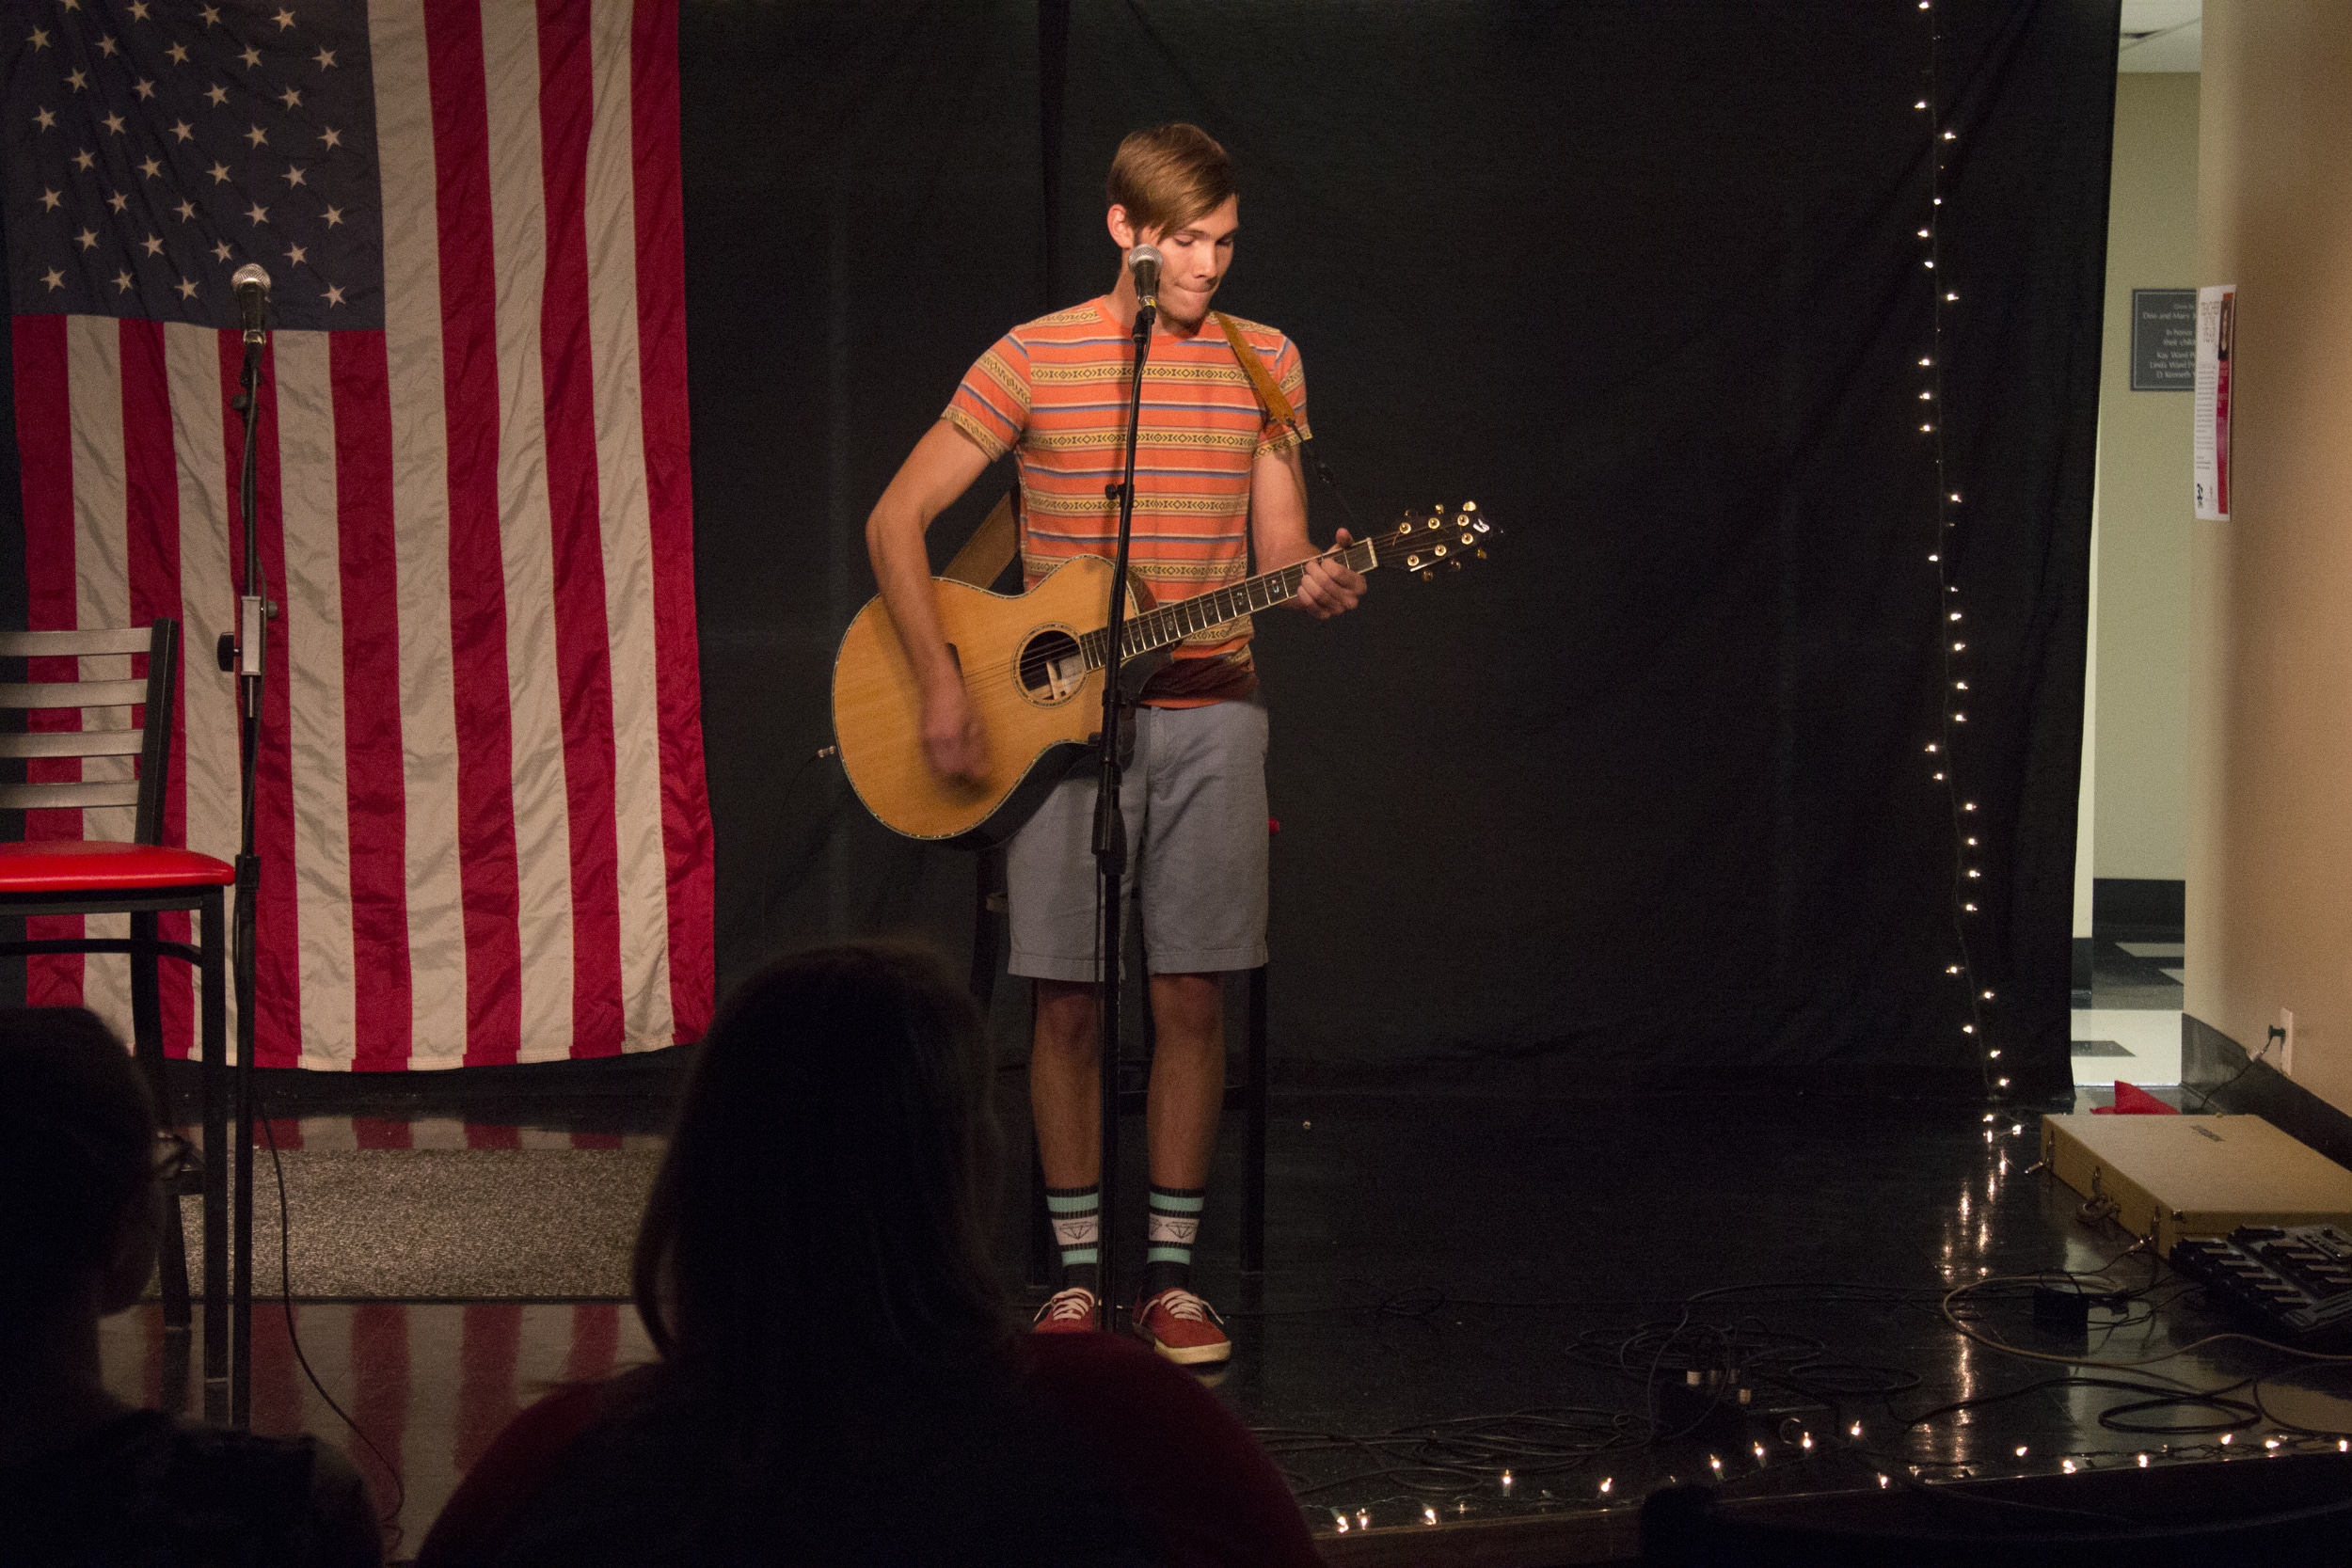  Caleb Cabe starts off the night with a performance of "Then" by Brad Paisley.&nbsp; 